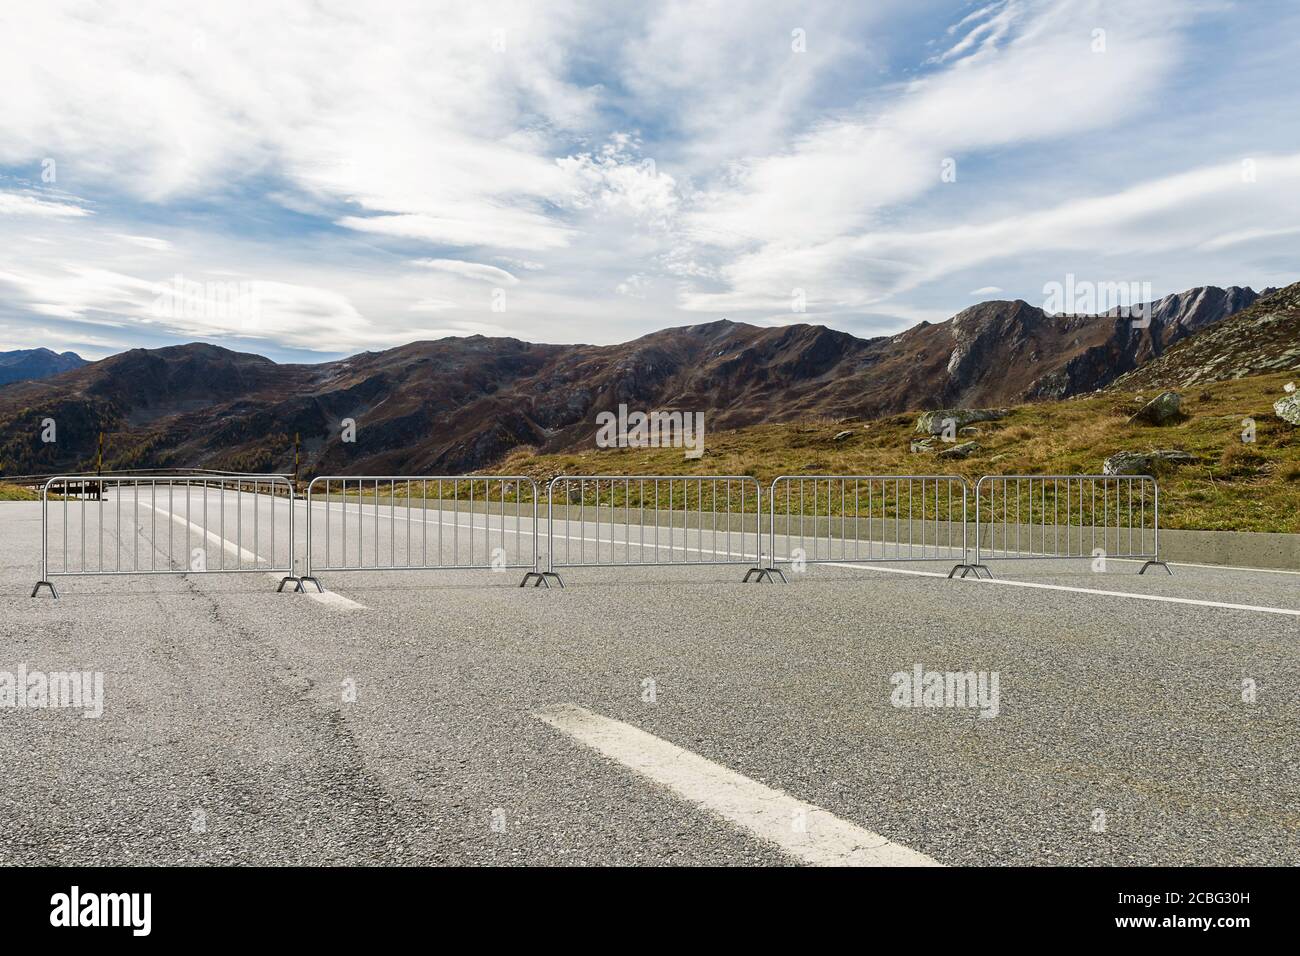 Steel barricades set across the road block the passage - a view of the mountains in the background - 3d illustration Stock Photo